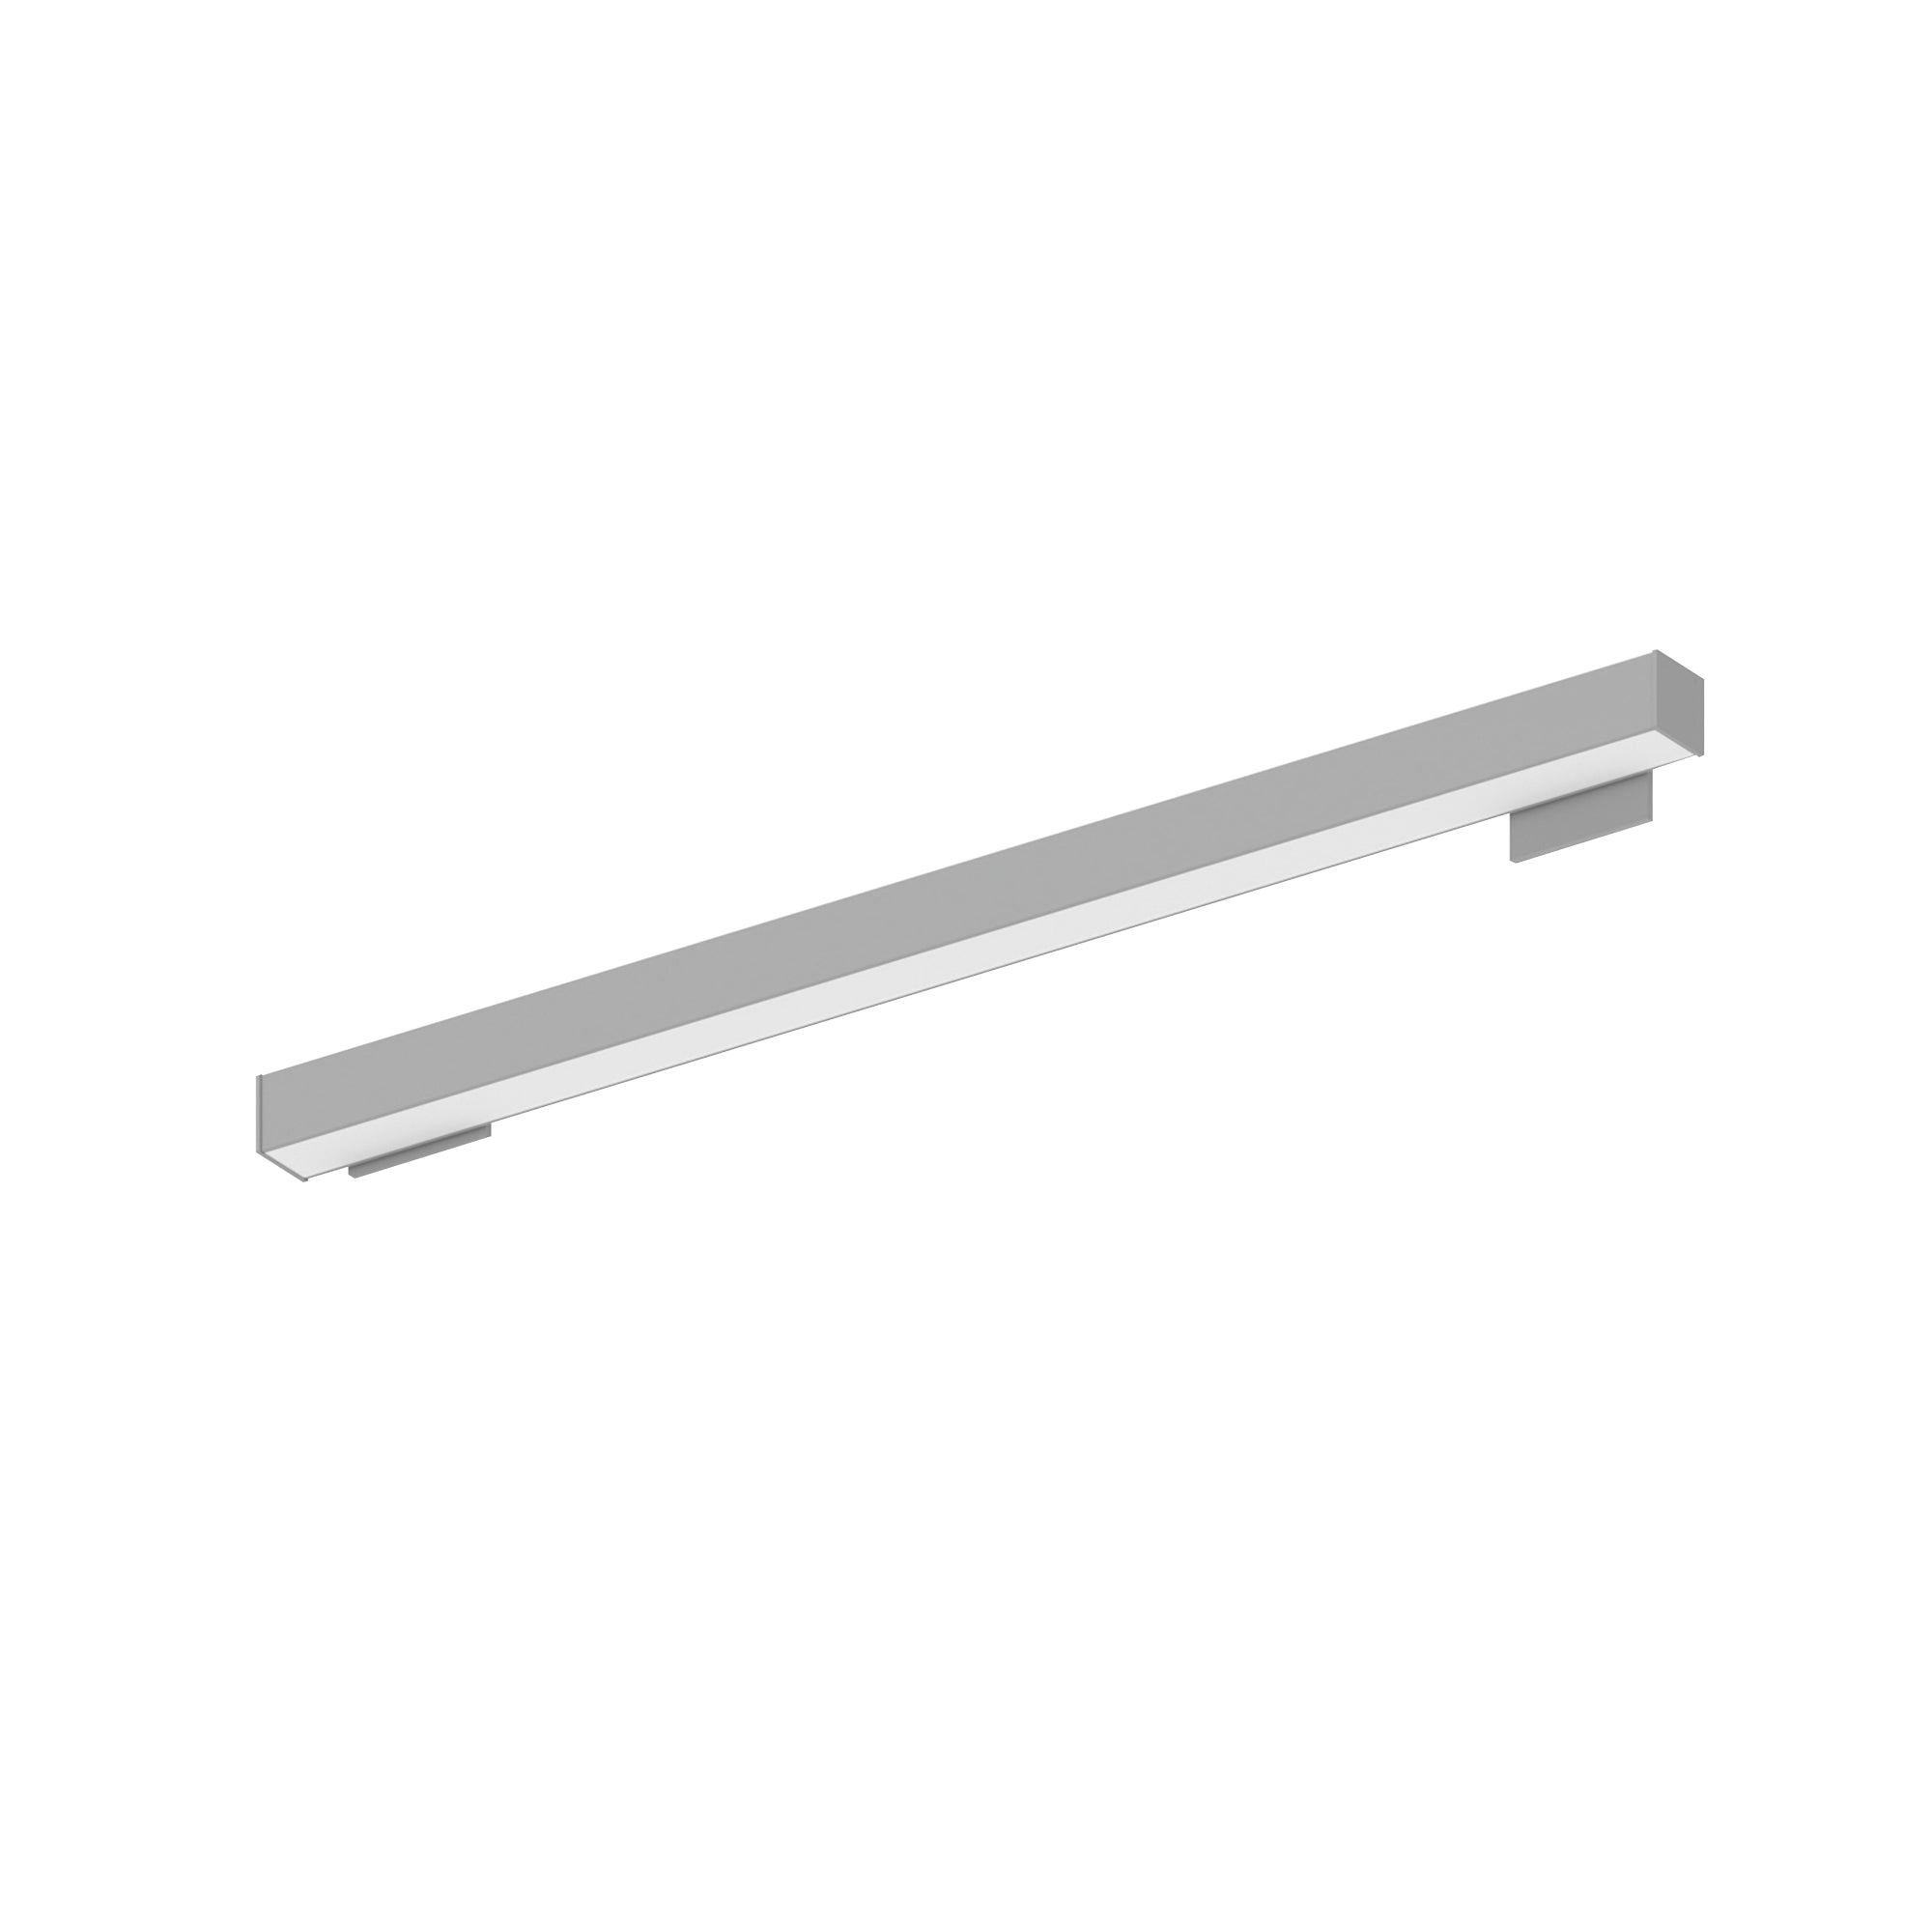 Nora Lighting NWLIN-41035A/L2P-R4 - Linear - 4' L-Line LED Wall Mount Linear, 4200lm / 3500K, 2 Inchx4 Inch Left Plate & 4 Inchx4 Inch Right Plate, Left Power Feed, Aluminum Finish